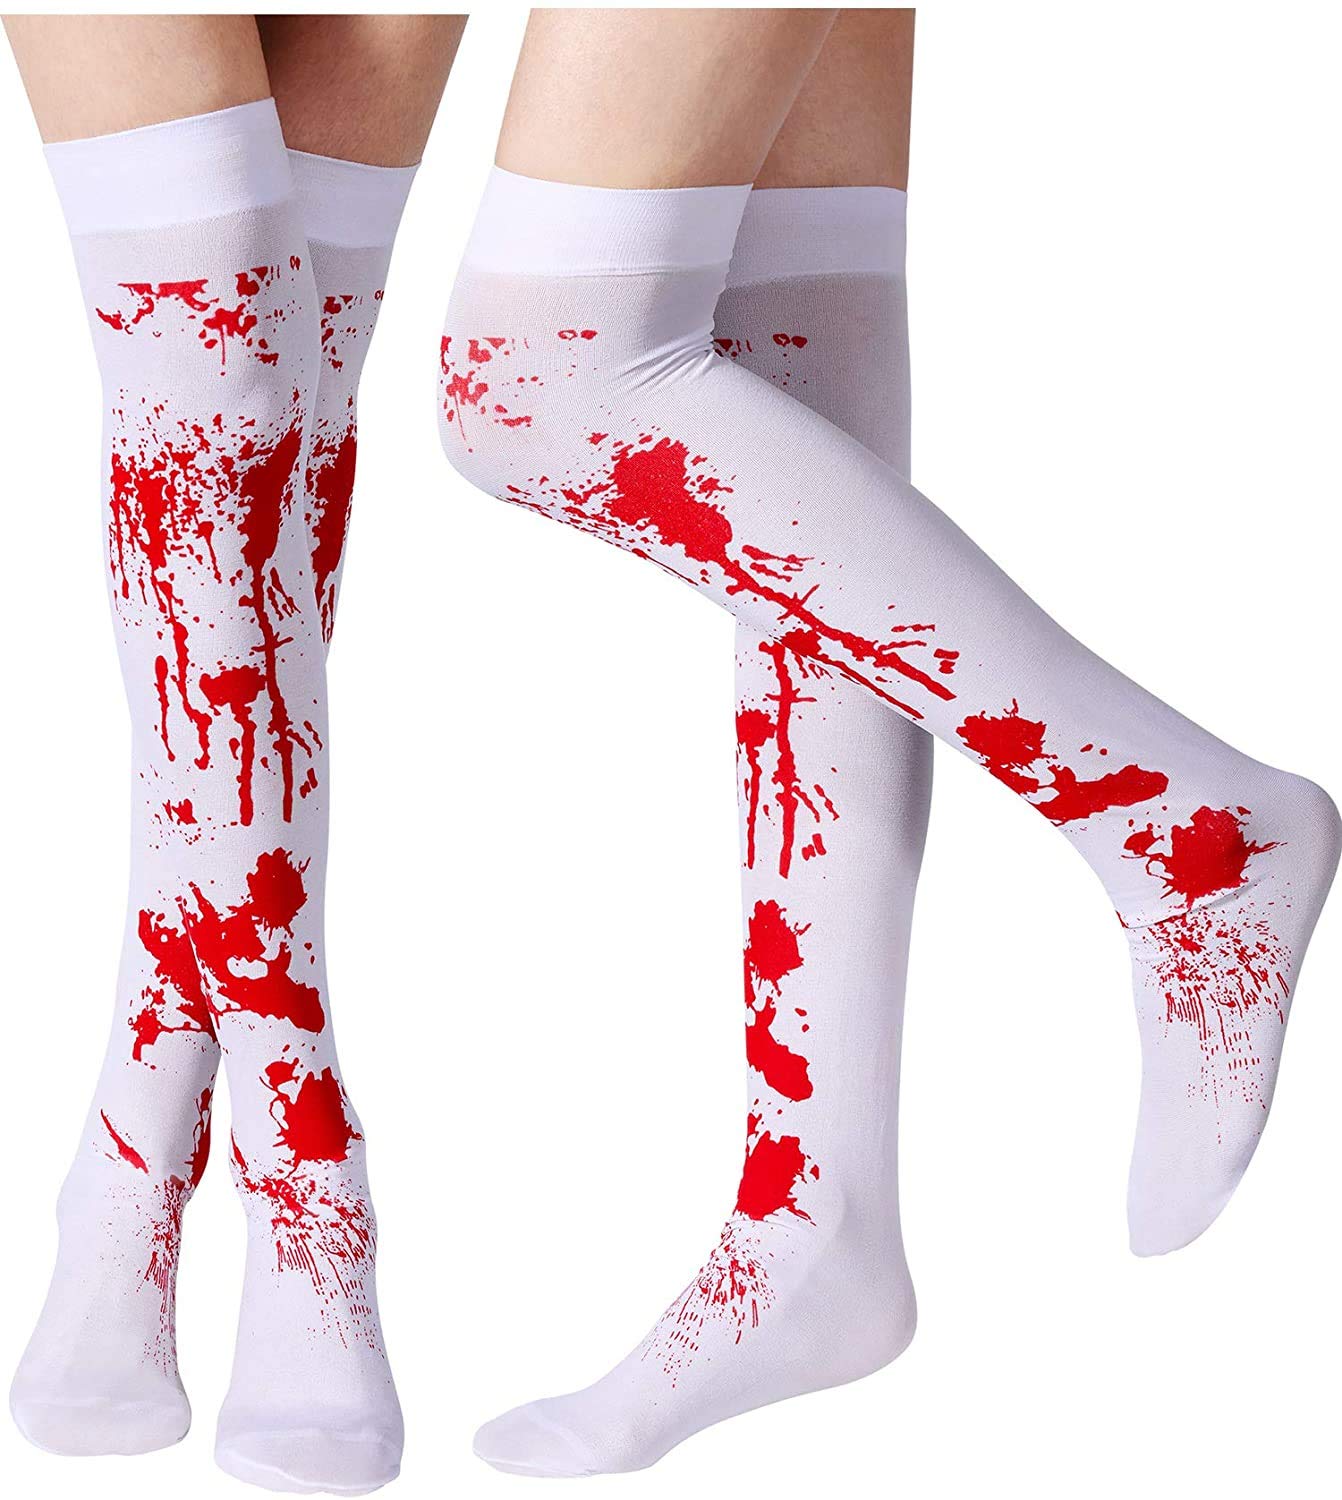 Scary Blood-Stained Halloween Stockings - Over Knee Zombie Festival Socks